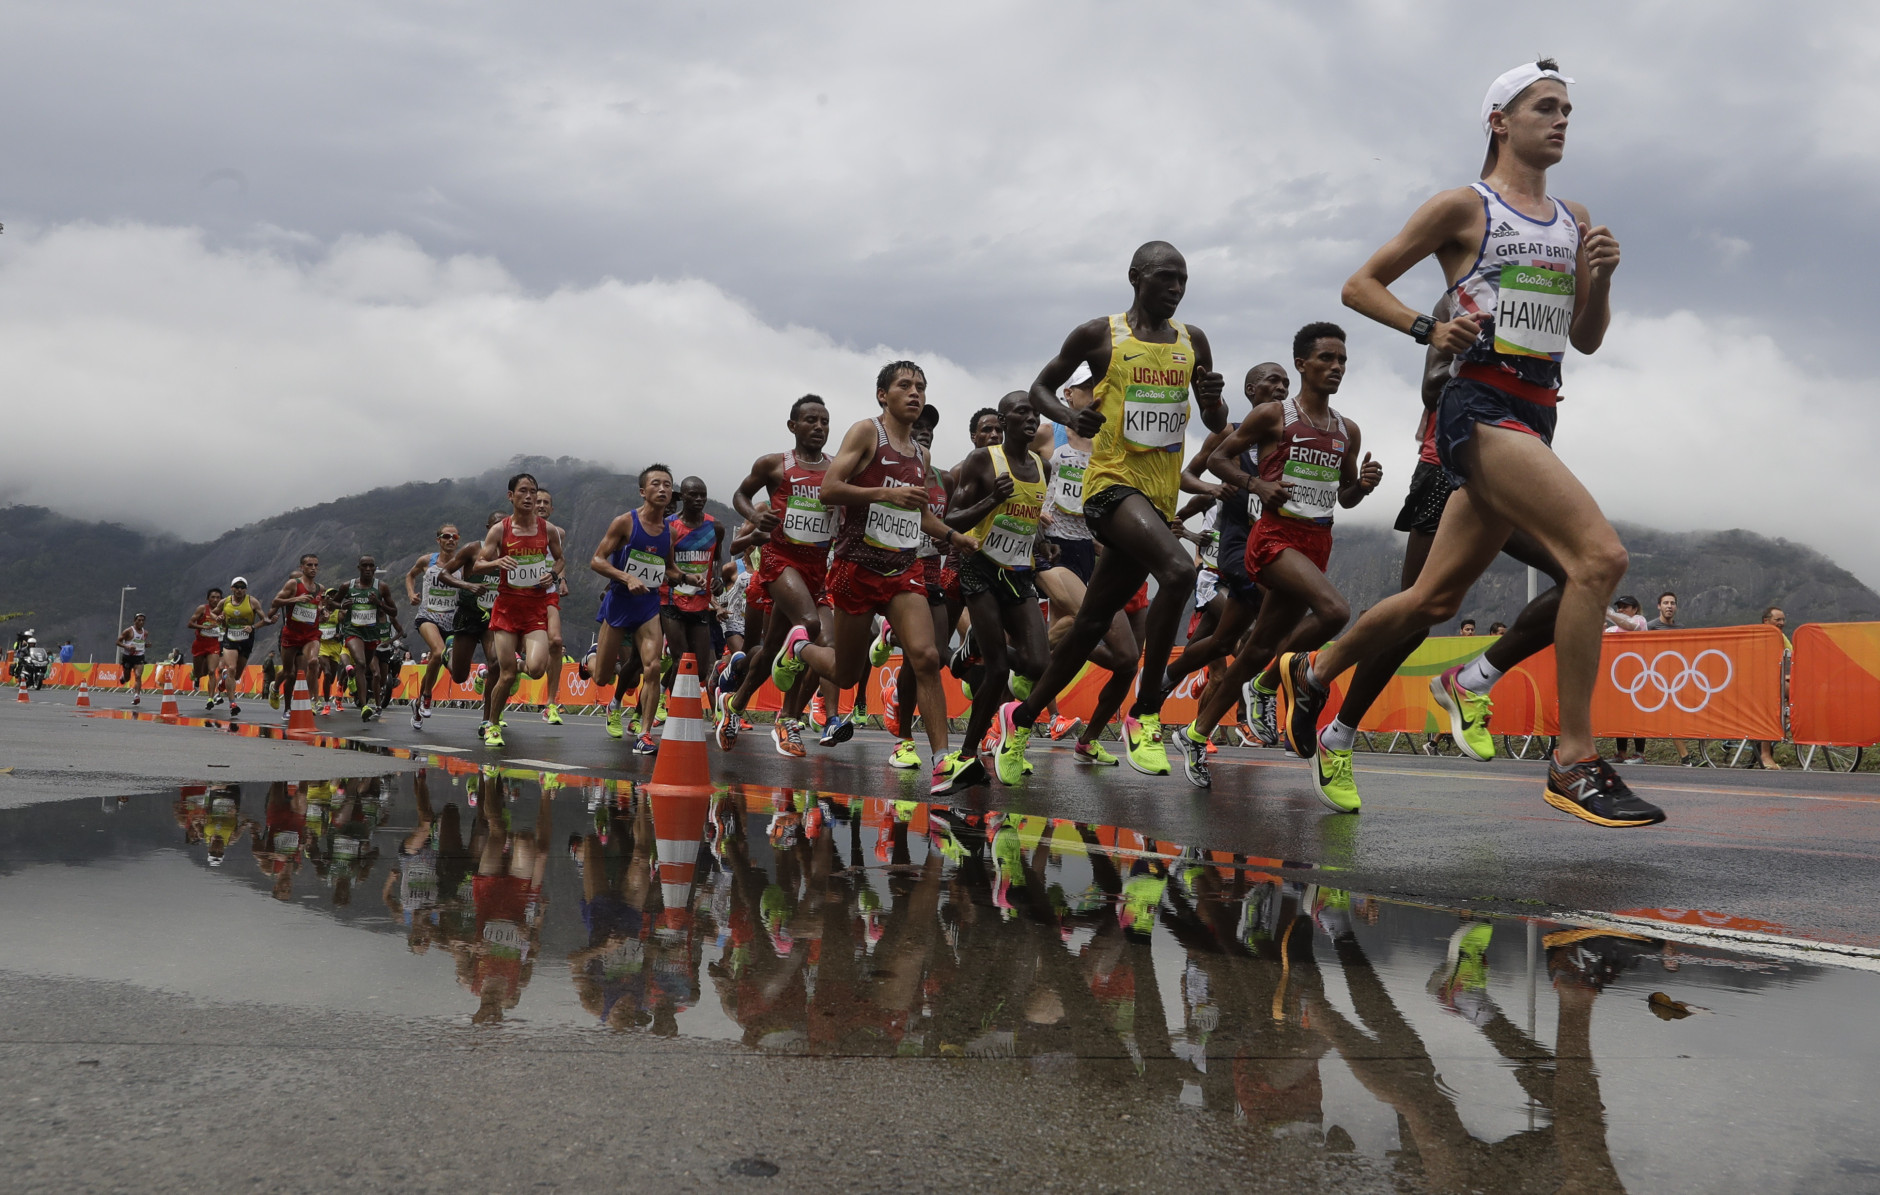 Athletes compete along the Guanabara bay and the Sugar Loaf mountain in the men's marathon at the 2016 Summer Olympics in Rio de Janeiro, Brazil, Sunday, Aug. 21, 2016. (AP Photo/Luca Bruno)